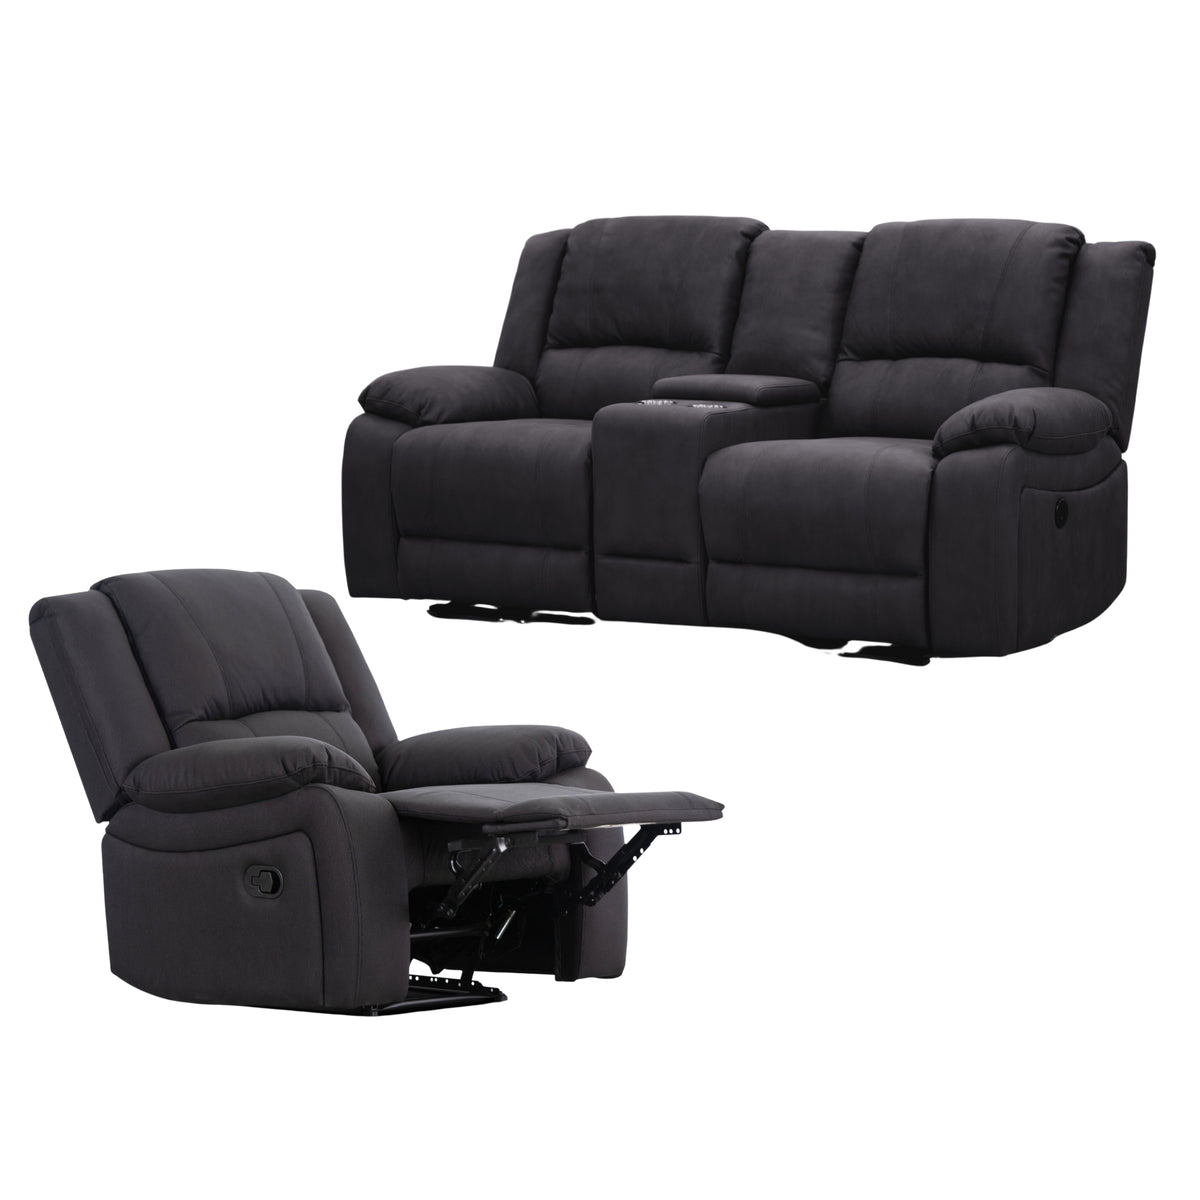 Anderson Fabric Electric Recliner Sofa Lounge Chair JET Dark Grey 1 + 2 Seater